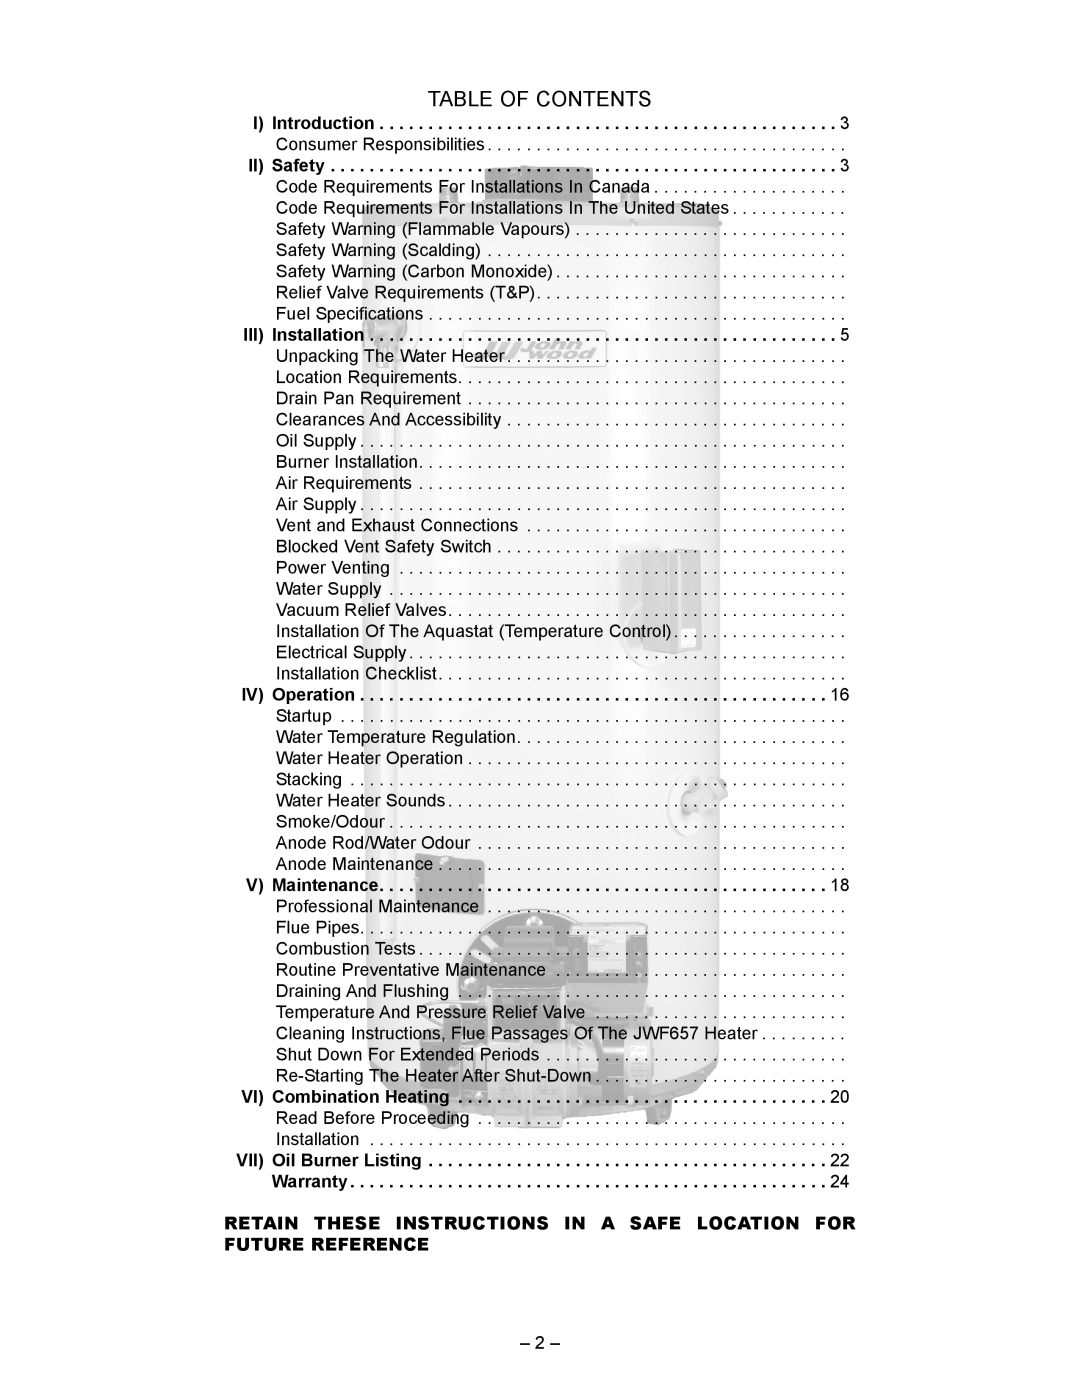 GSW JWF507, JWF657 manual Table Of Contents 